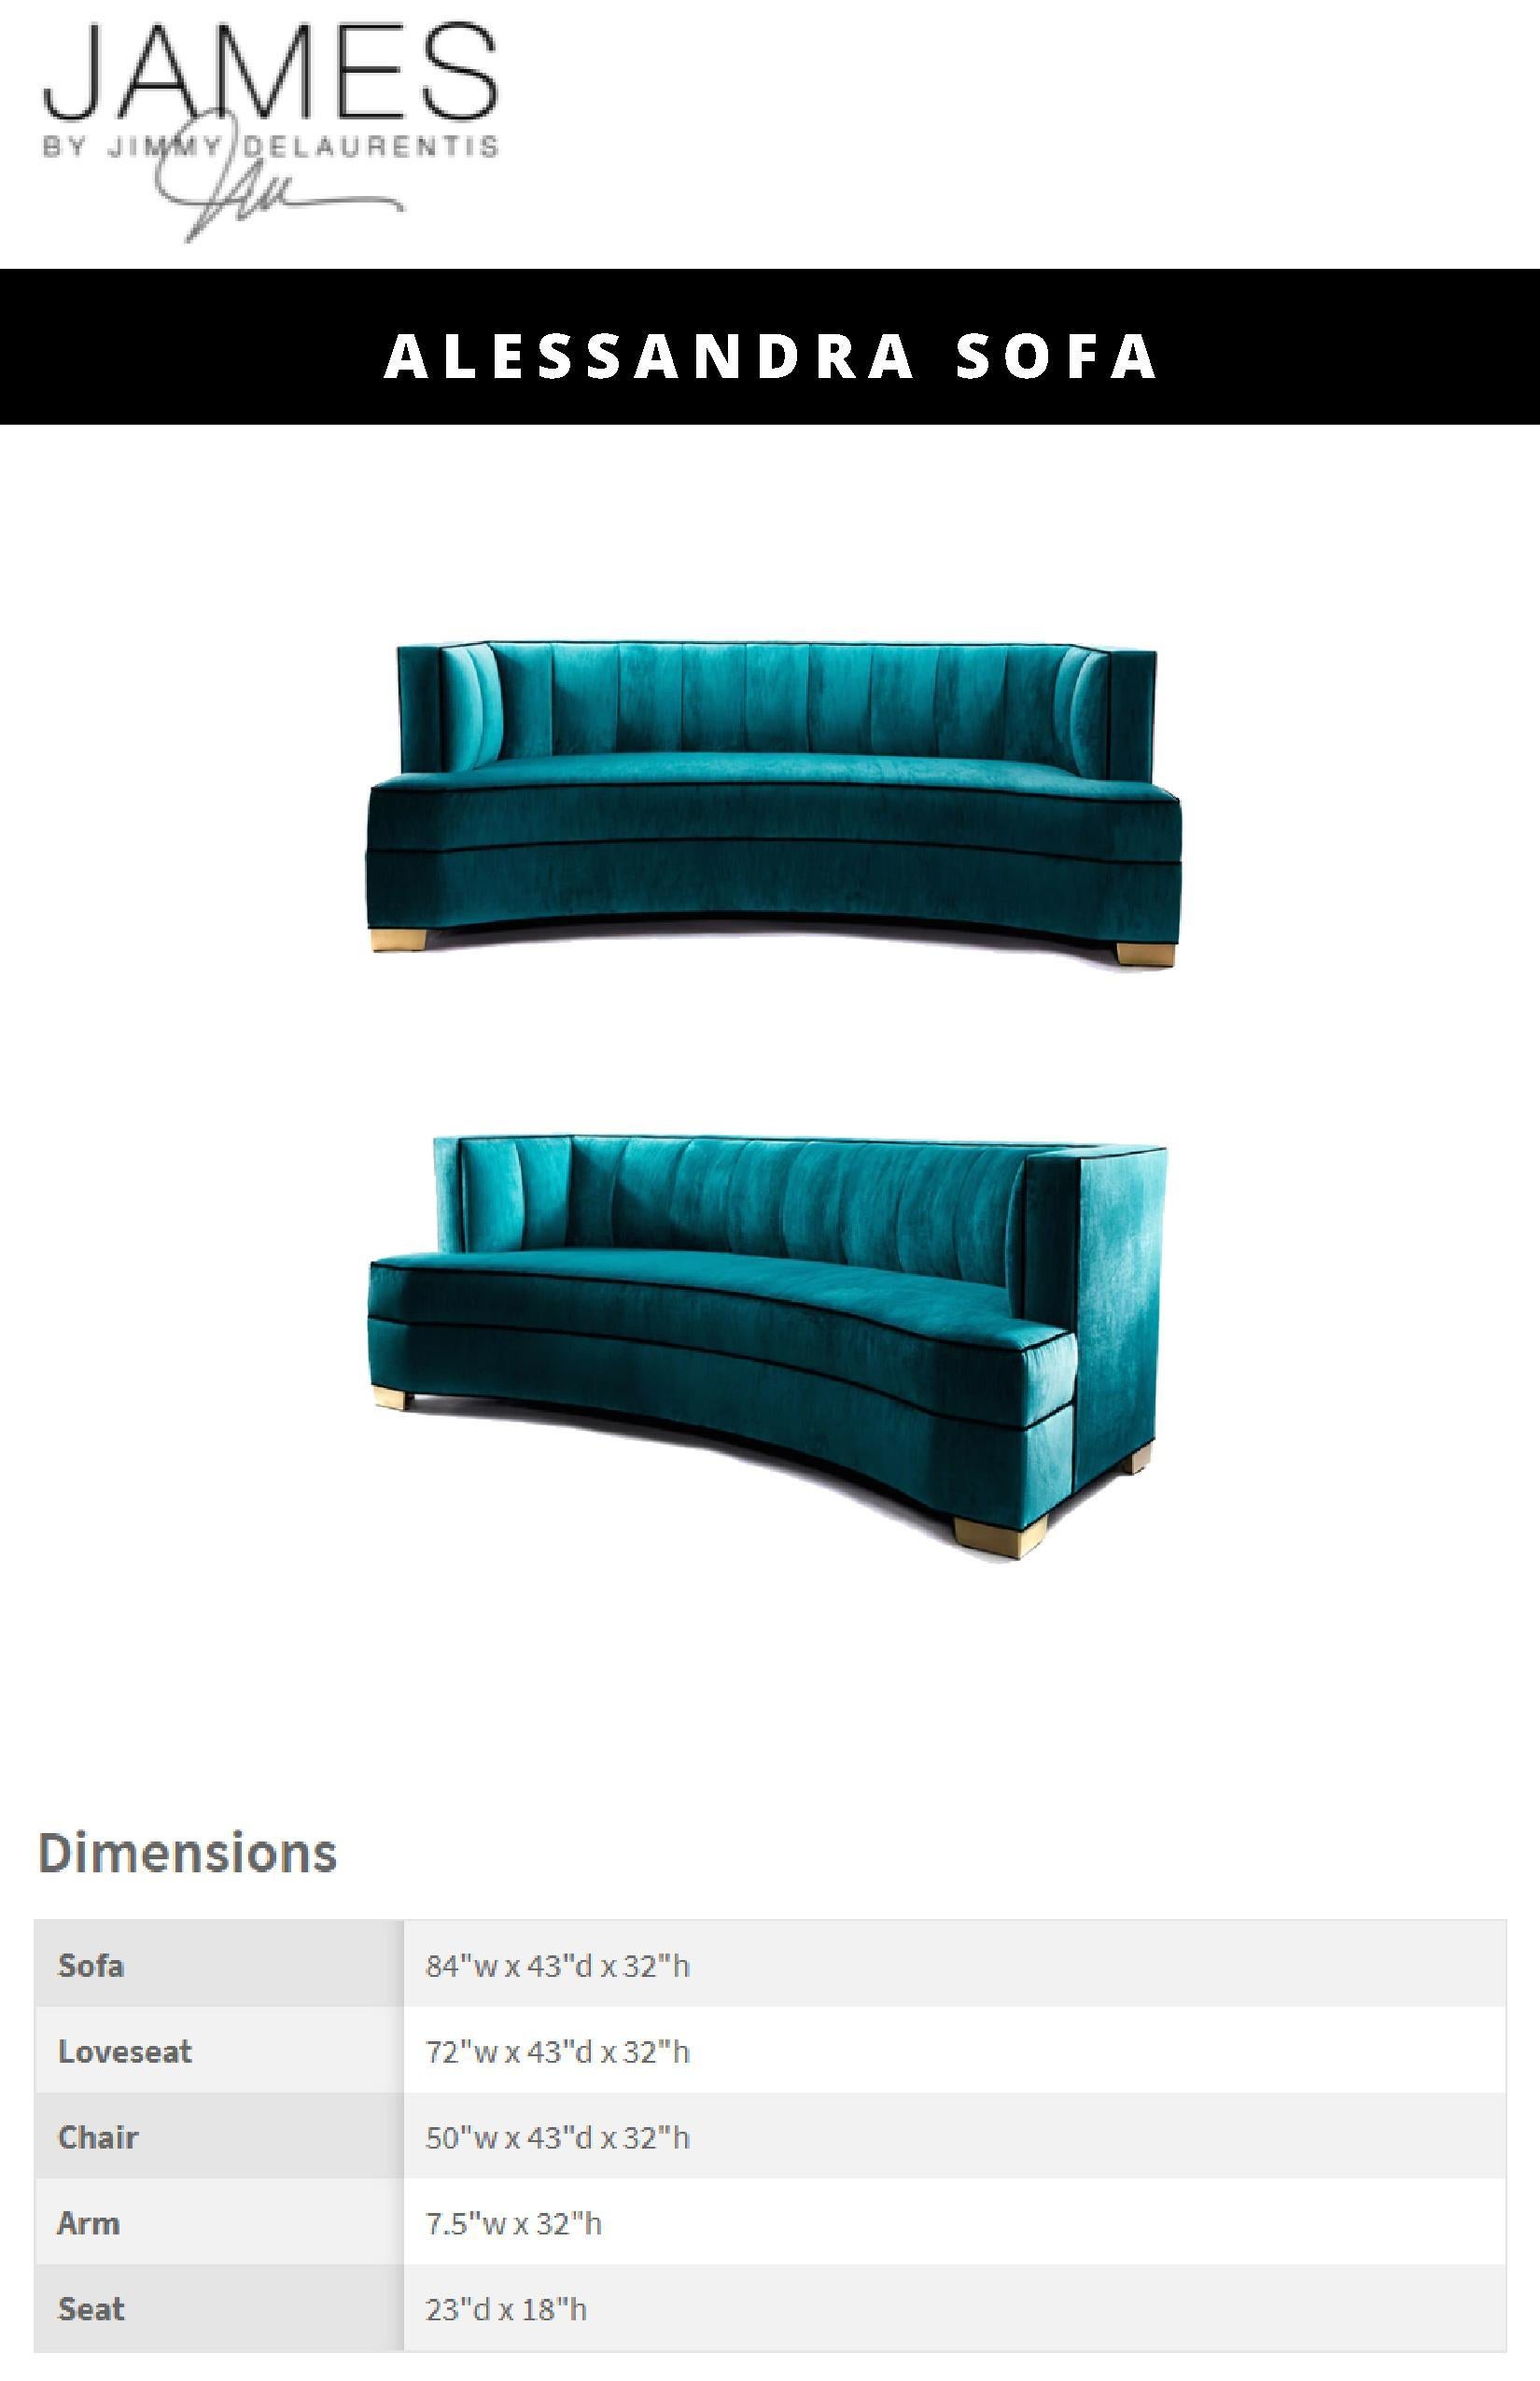 American Art Deco Alessandra Curved Sofa Handcrafted by JAMES by Jimmy Delaurentis For Sale